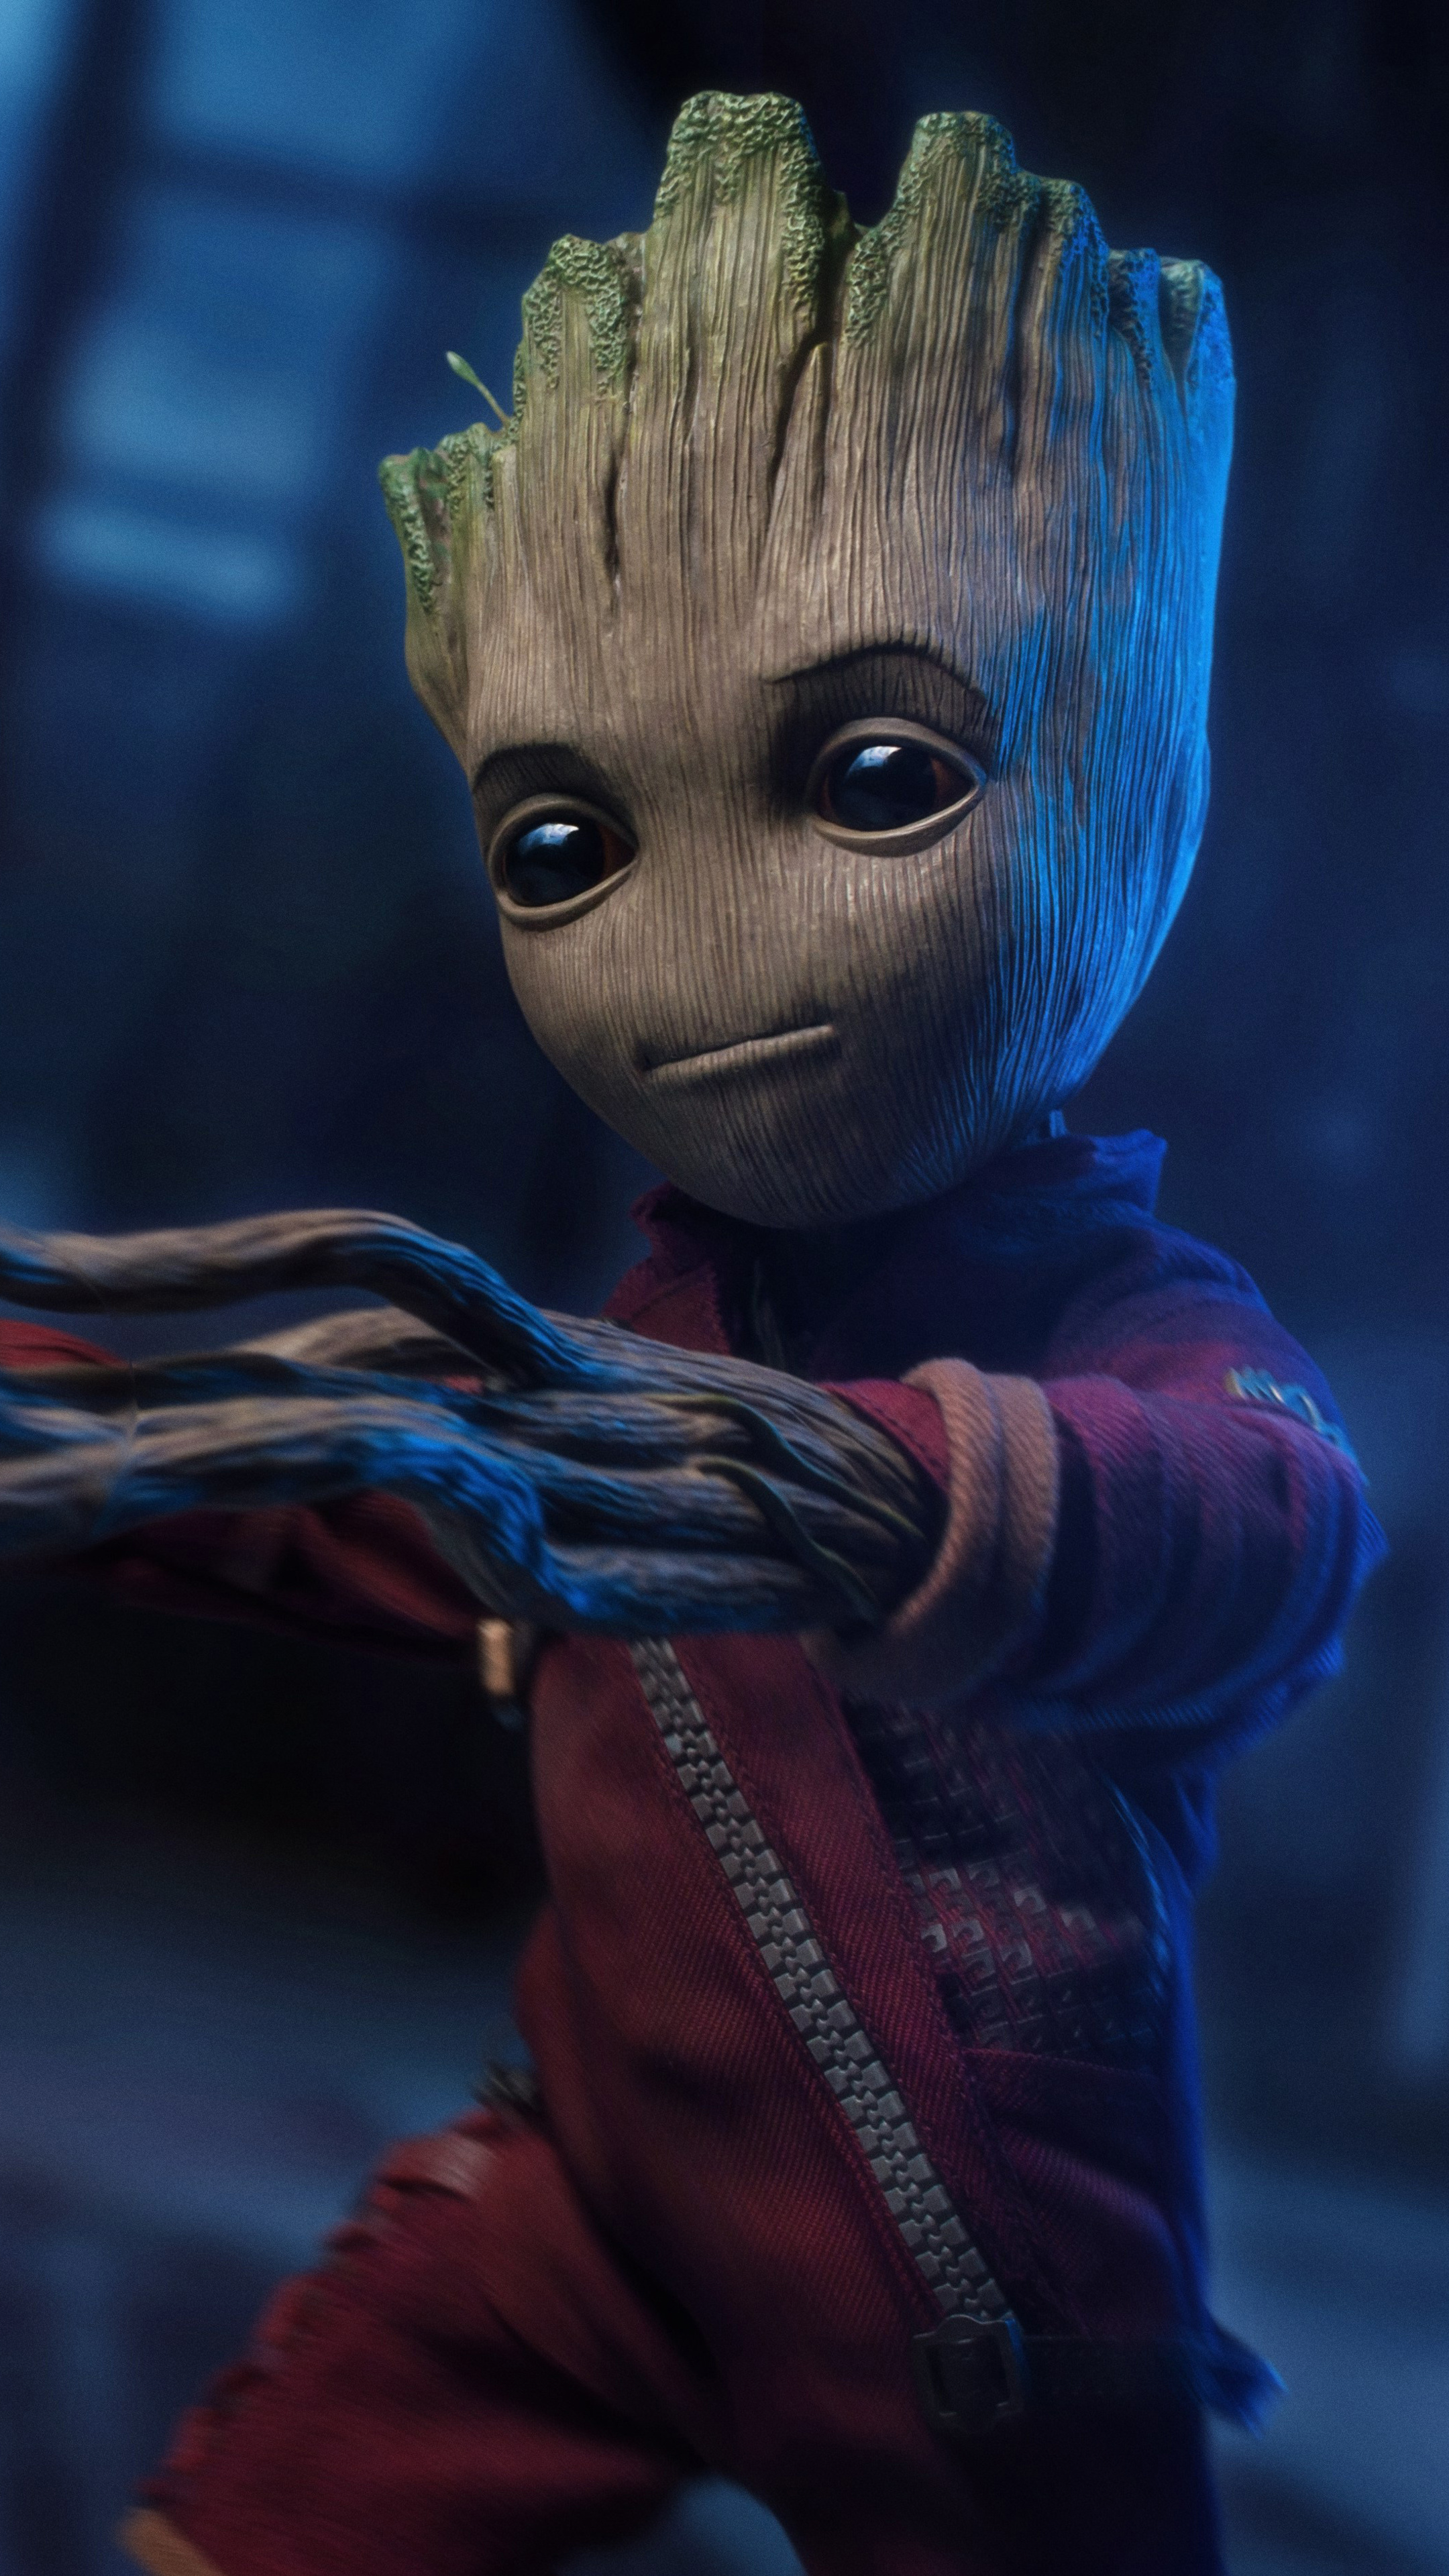 Baby Groot in 5K, 2018 Sony Xperia wallpaper, High-resolution images, Marvel superhero, 2160x3840 4K Handy